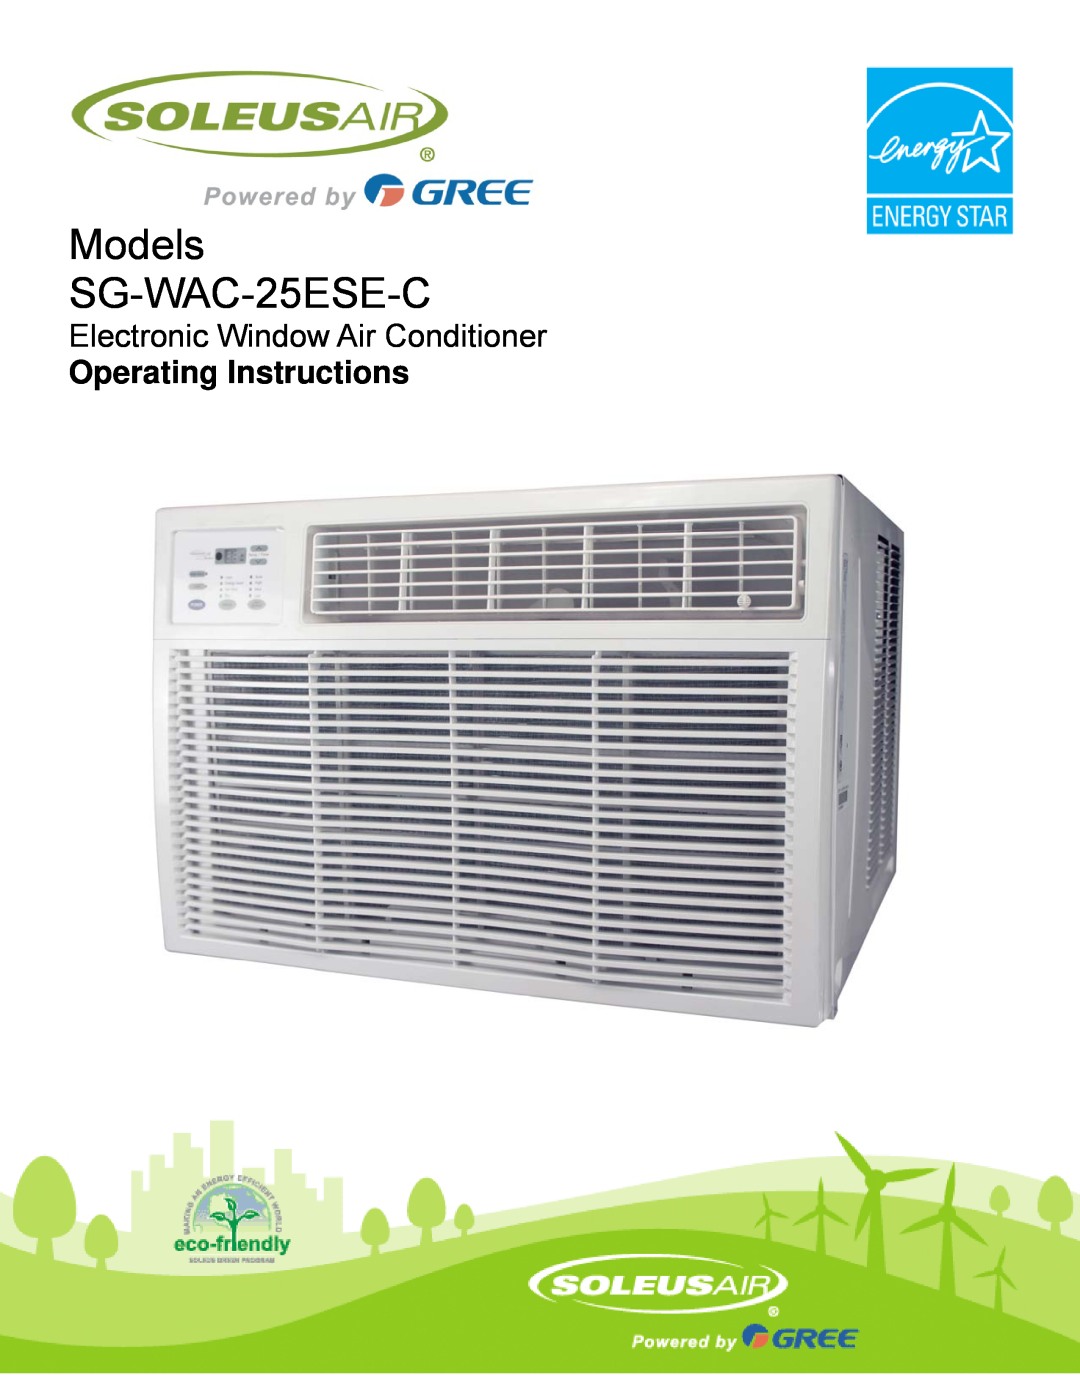 Soleus Air operating instructions Models SG-WAC-25ESE-C, Electronic Window Air Conditioner, Operating Instructions 